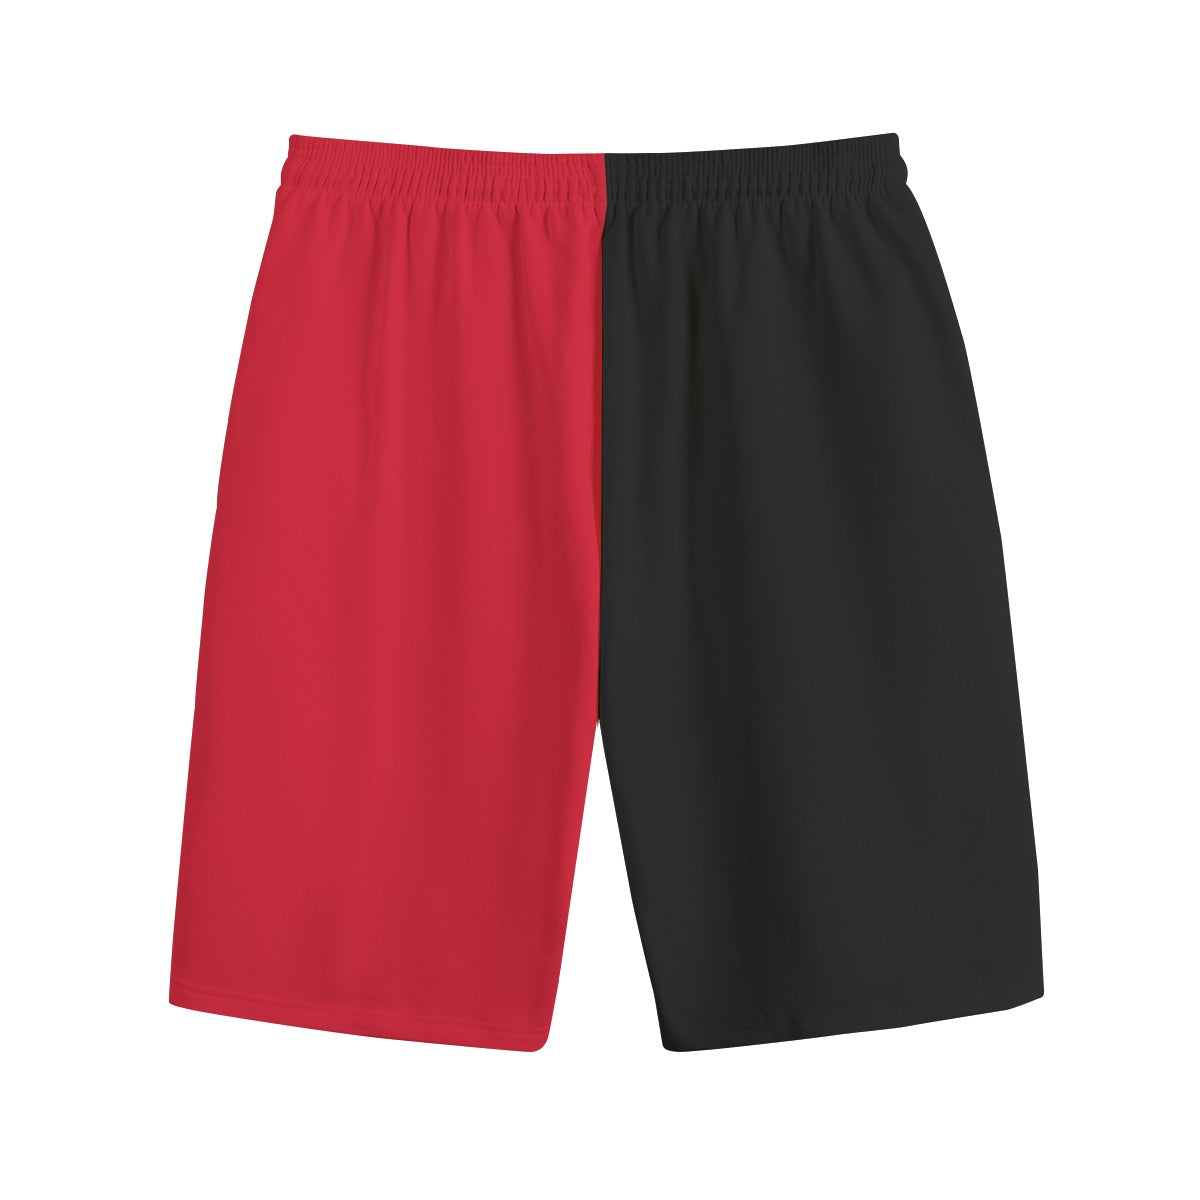 - AM&IS Red Color Block Men's Shorts | 100% Cotton - mens shorts at TFC&H Co.